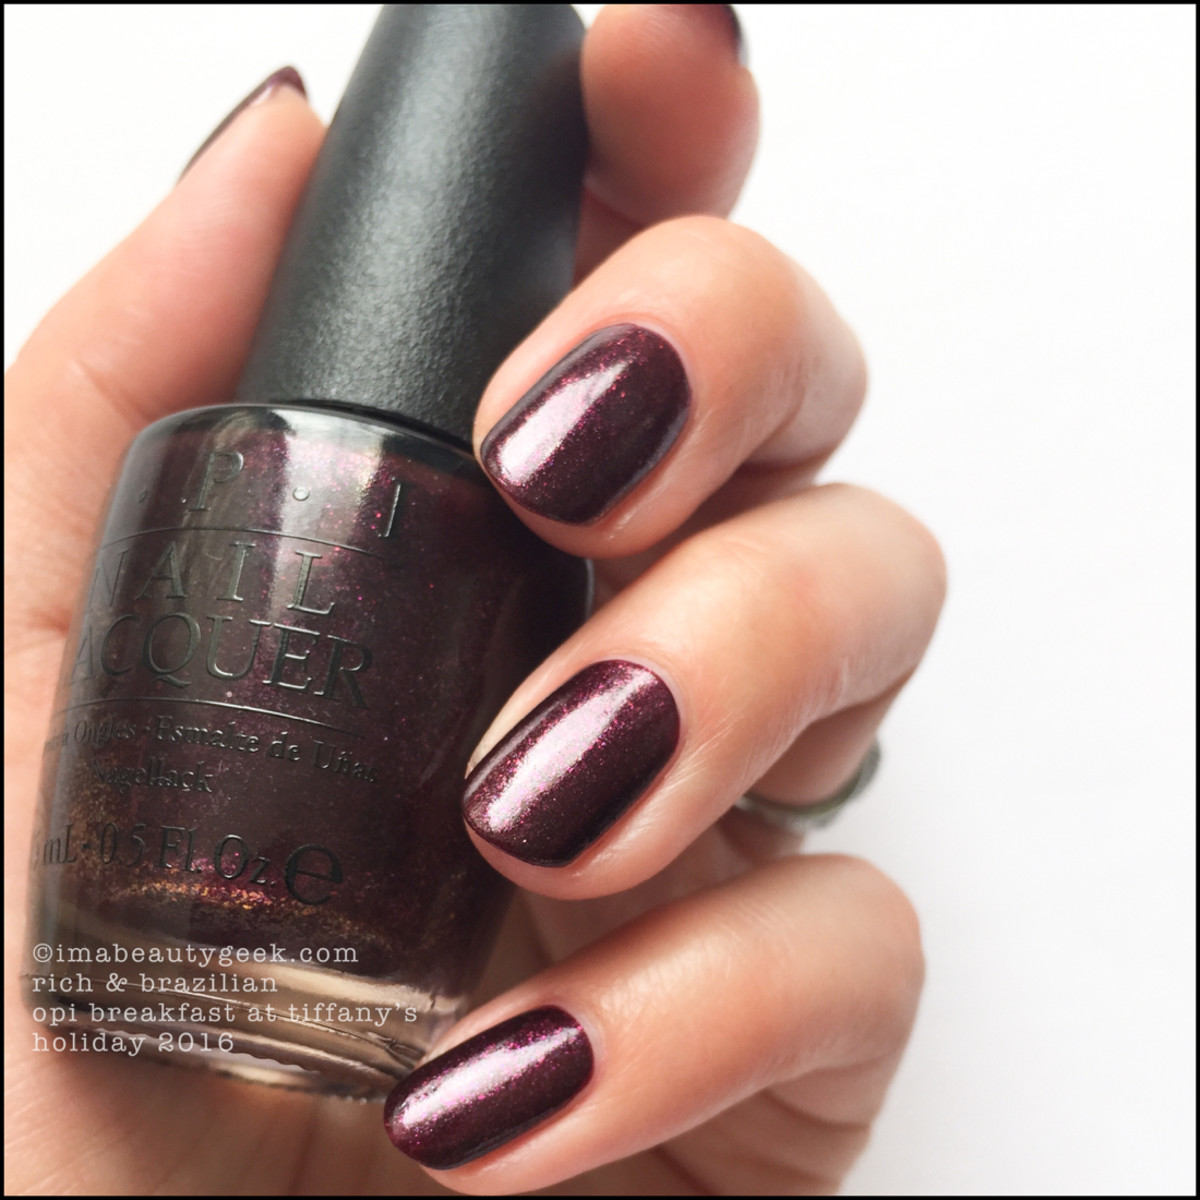 OPI Rich and Brazilian_OPI Breakfast At Tiffanys Collection Swatches Review Holiday 2016.jpg